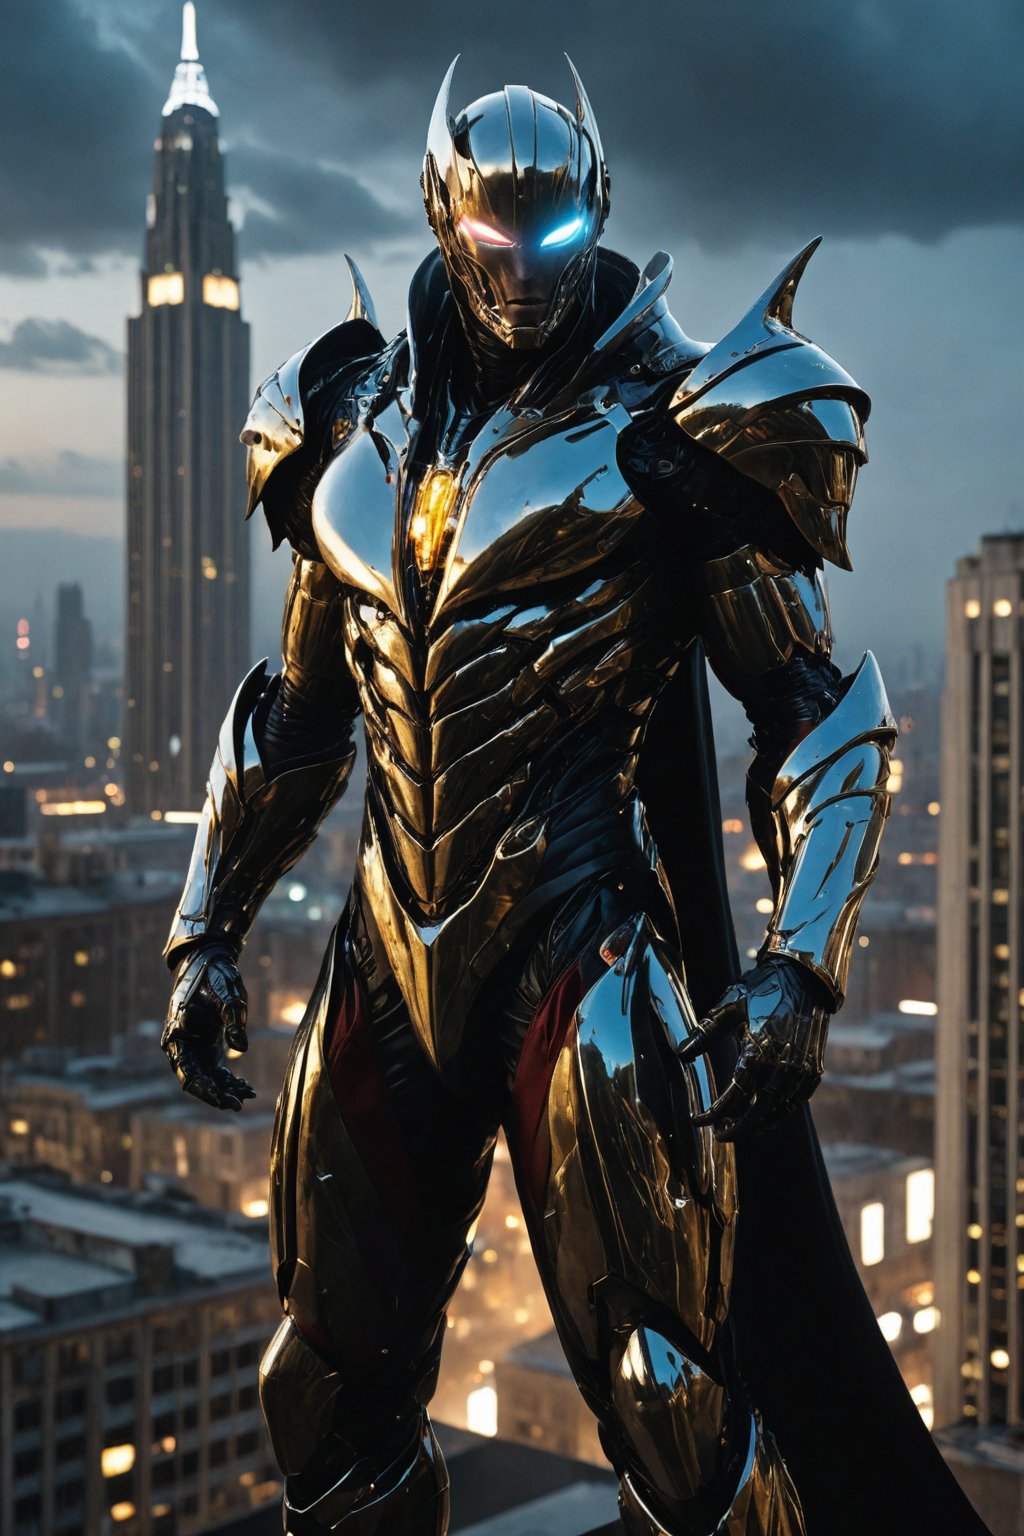 A futuristic super hero stands tall, full-body portrait in polished chrome armor with intricate gold and burgundy accents. Glowing blue eyes pierce through the darkness, illuminating a cityscape at dusk. Craig Mullins and H.R. Giger's character design brings forth a sense of otherworldly strength. Realistic digital painting captures every detail, from the armored suit to the subject's determined pose. Cinematic lighting highlights the hero's figure against a misty blue-gray sky, as if suspended in mid-air. A 4K resolution masterpiece, this portrait embodies the essence of futuristic super heroism.